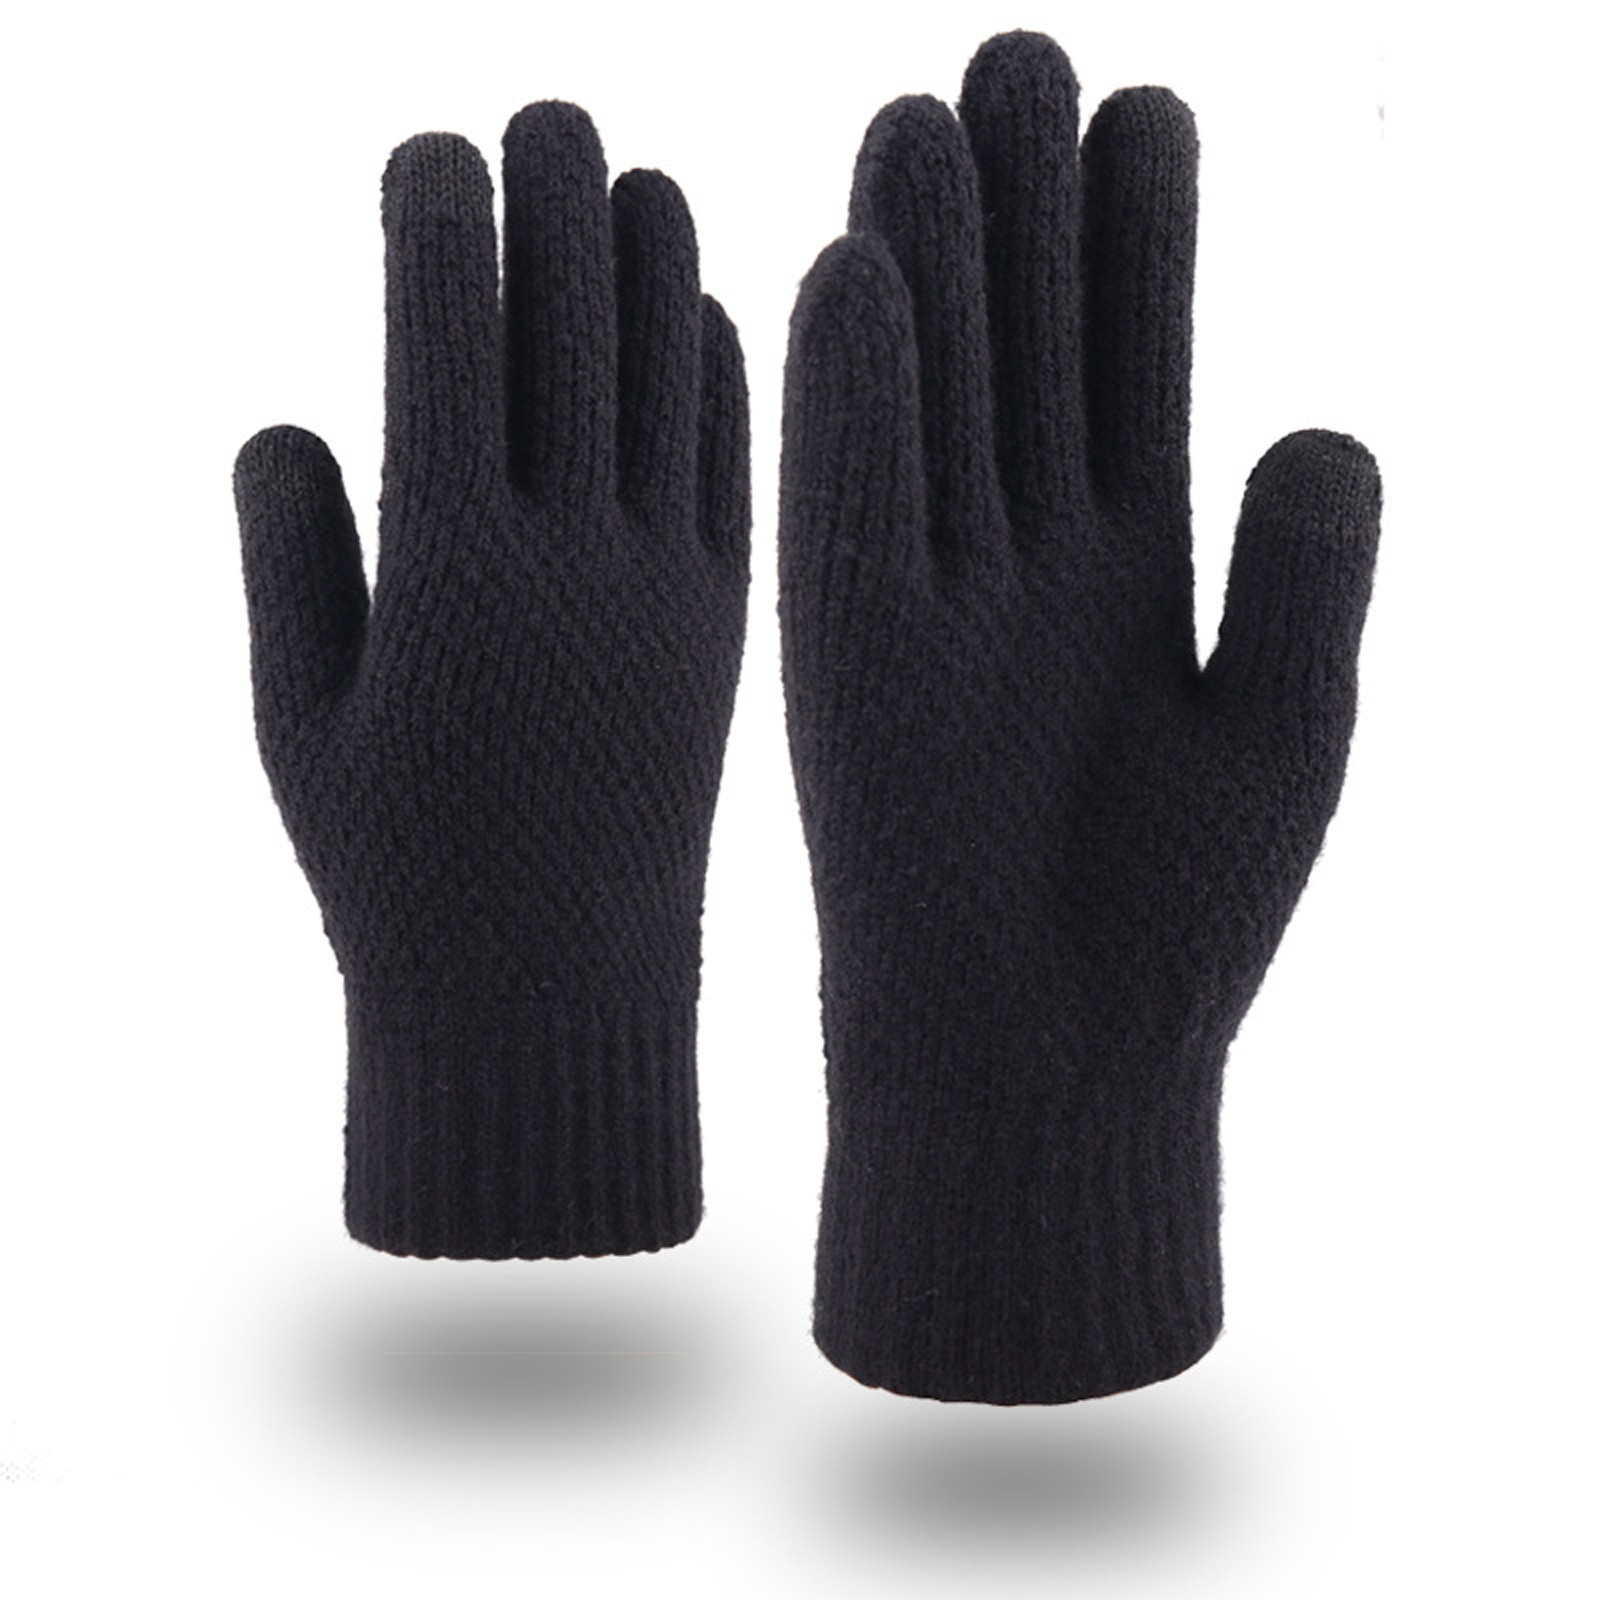 Men Thicken Winter Knitted Woolen Gloves Warm Full Finger Touch Screen Mittens Outdoor Bicycle Gloves Mittens Guantes